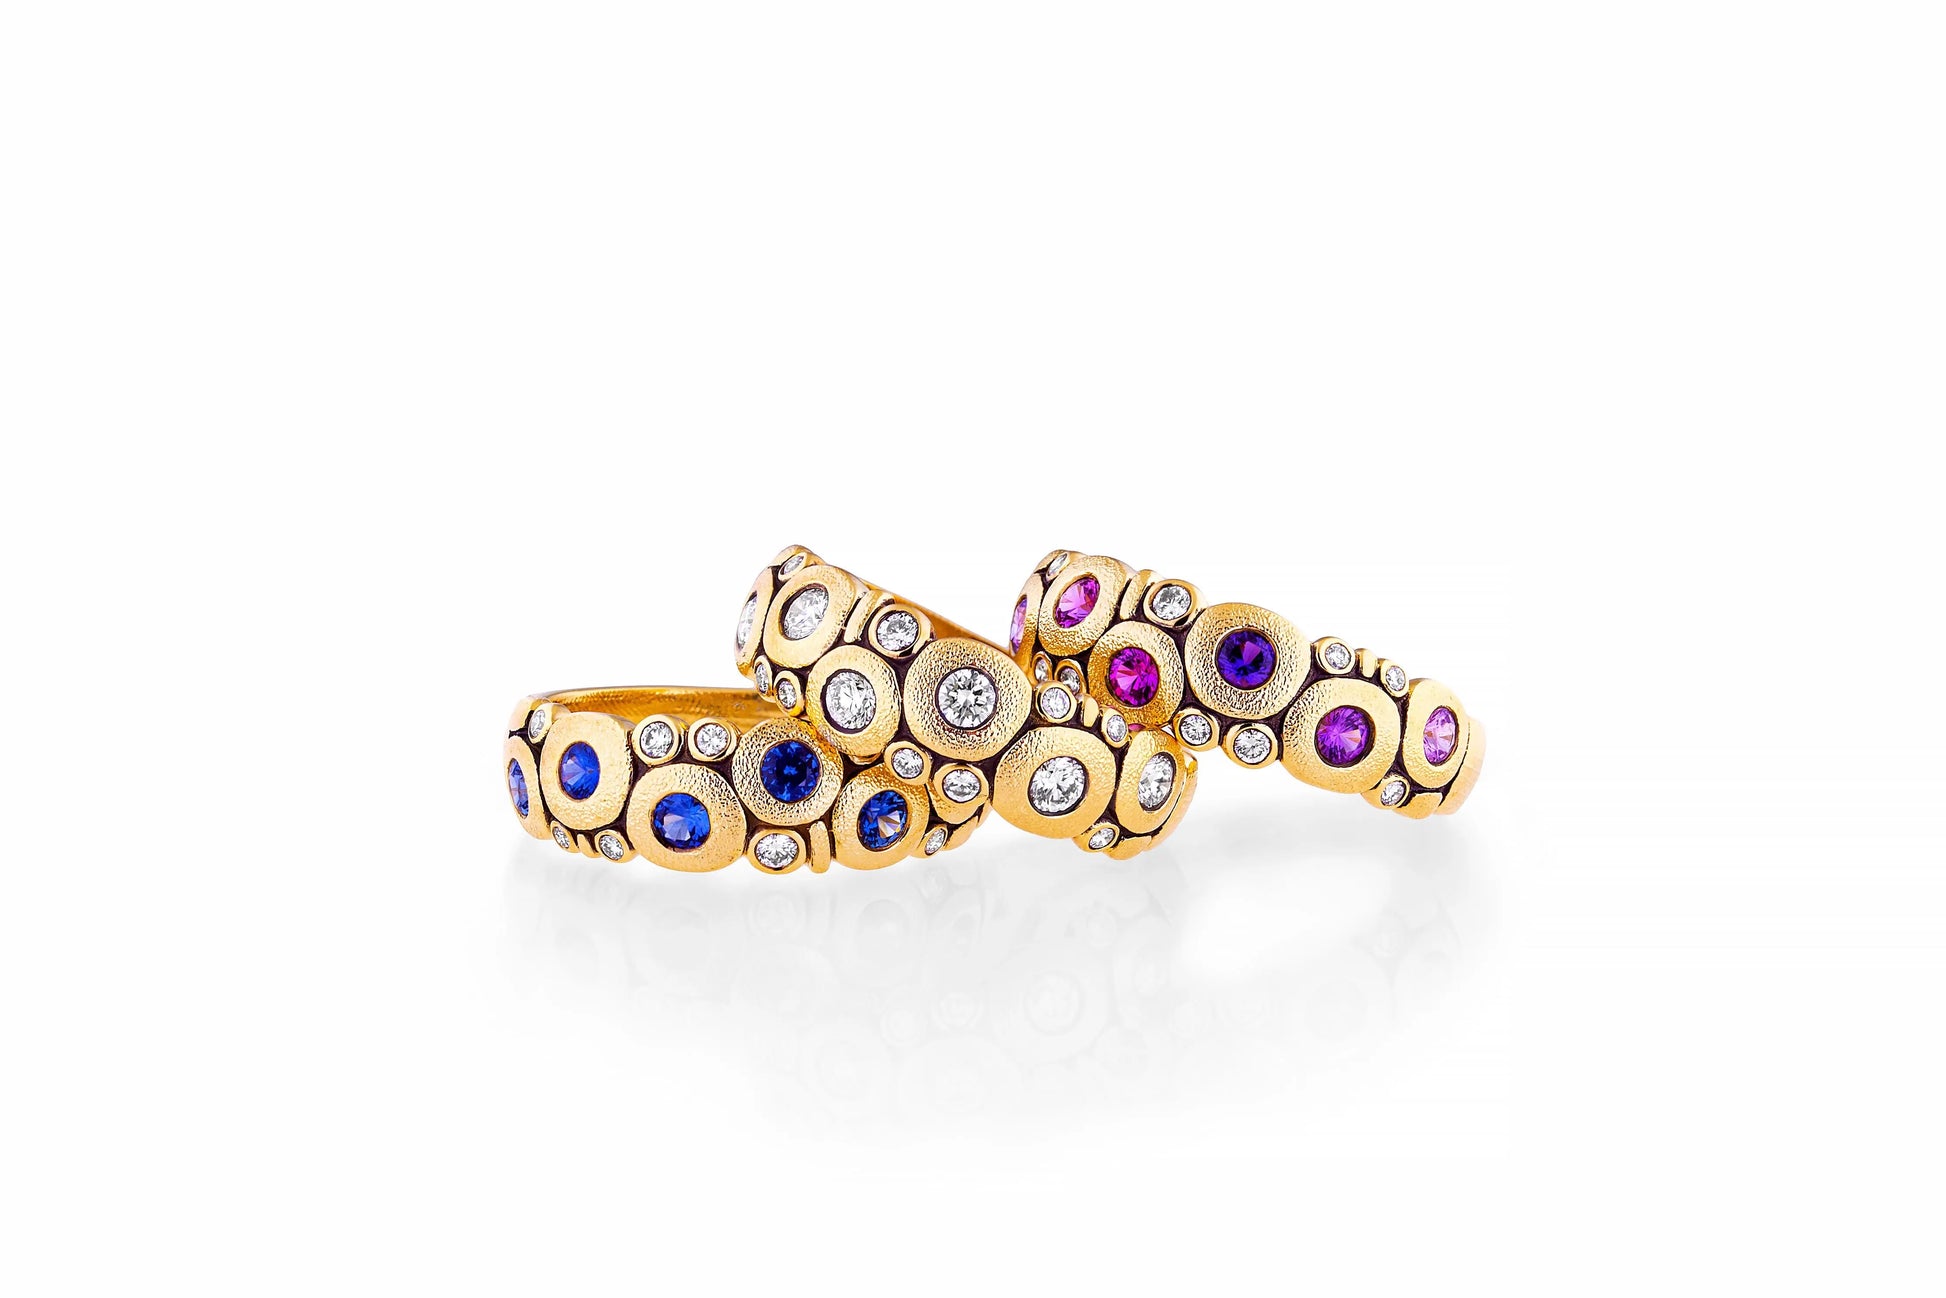 18k yellow gold "Candy Dome" ring with sapphire and diamonds Details: 9 white diamonds .12ct and 6 blue sapphires designed by Alex Sepkus made in NYC